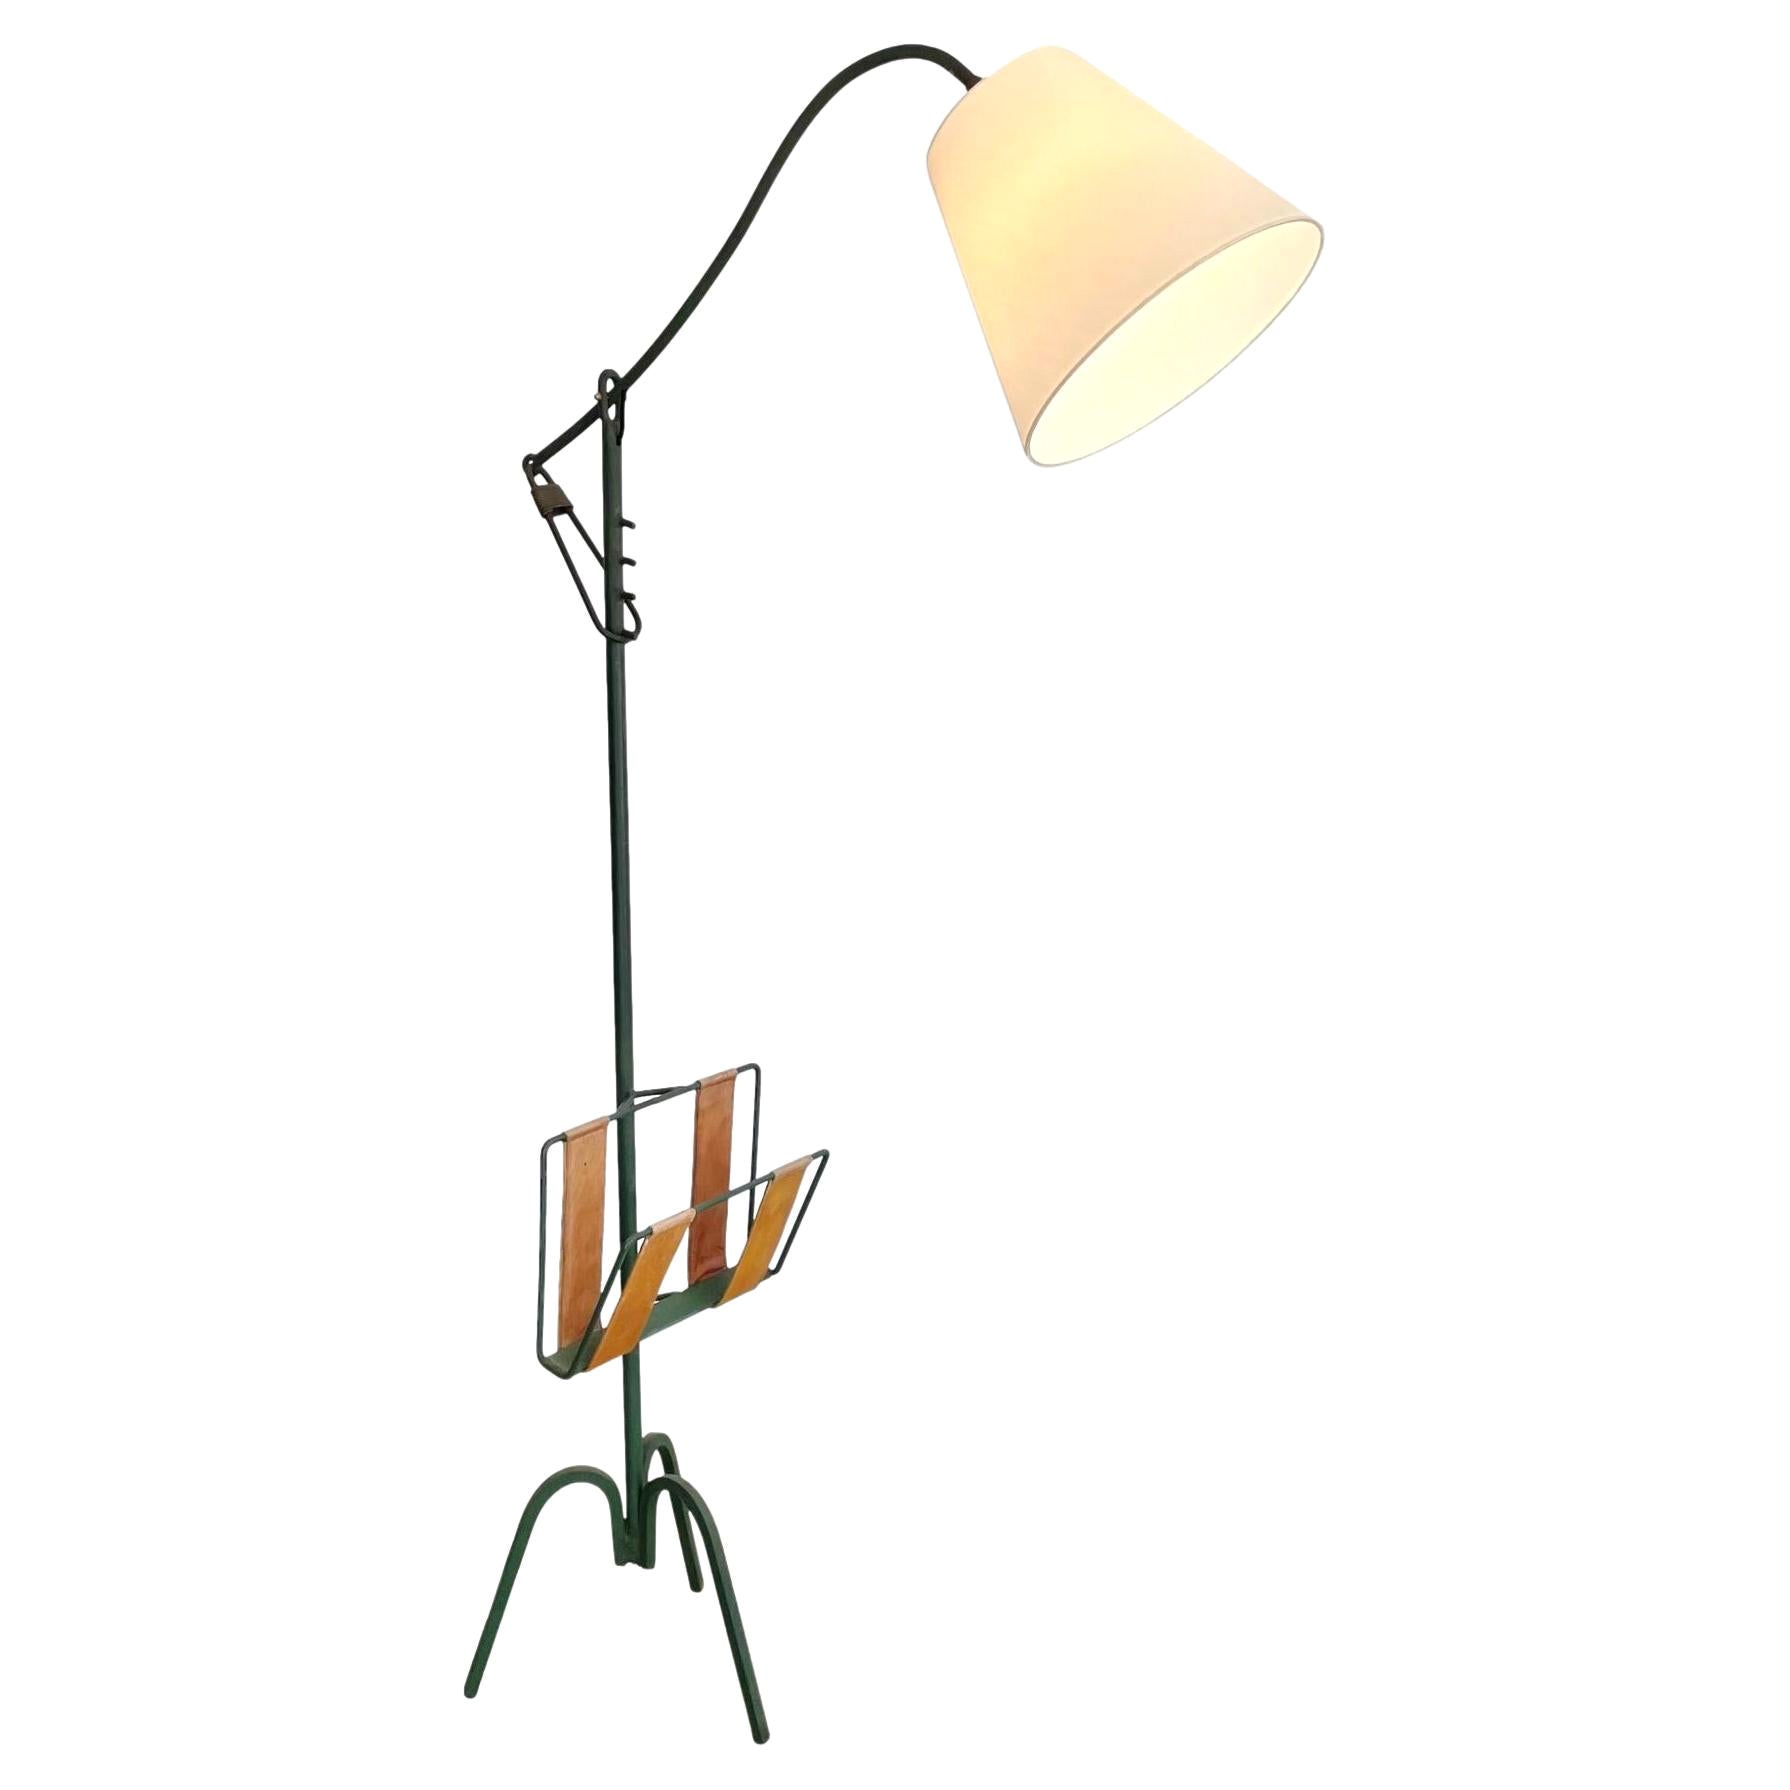 Adjustable Iron Floor Lamp in the style of Jacques Adnet, 1950s France